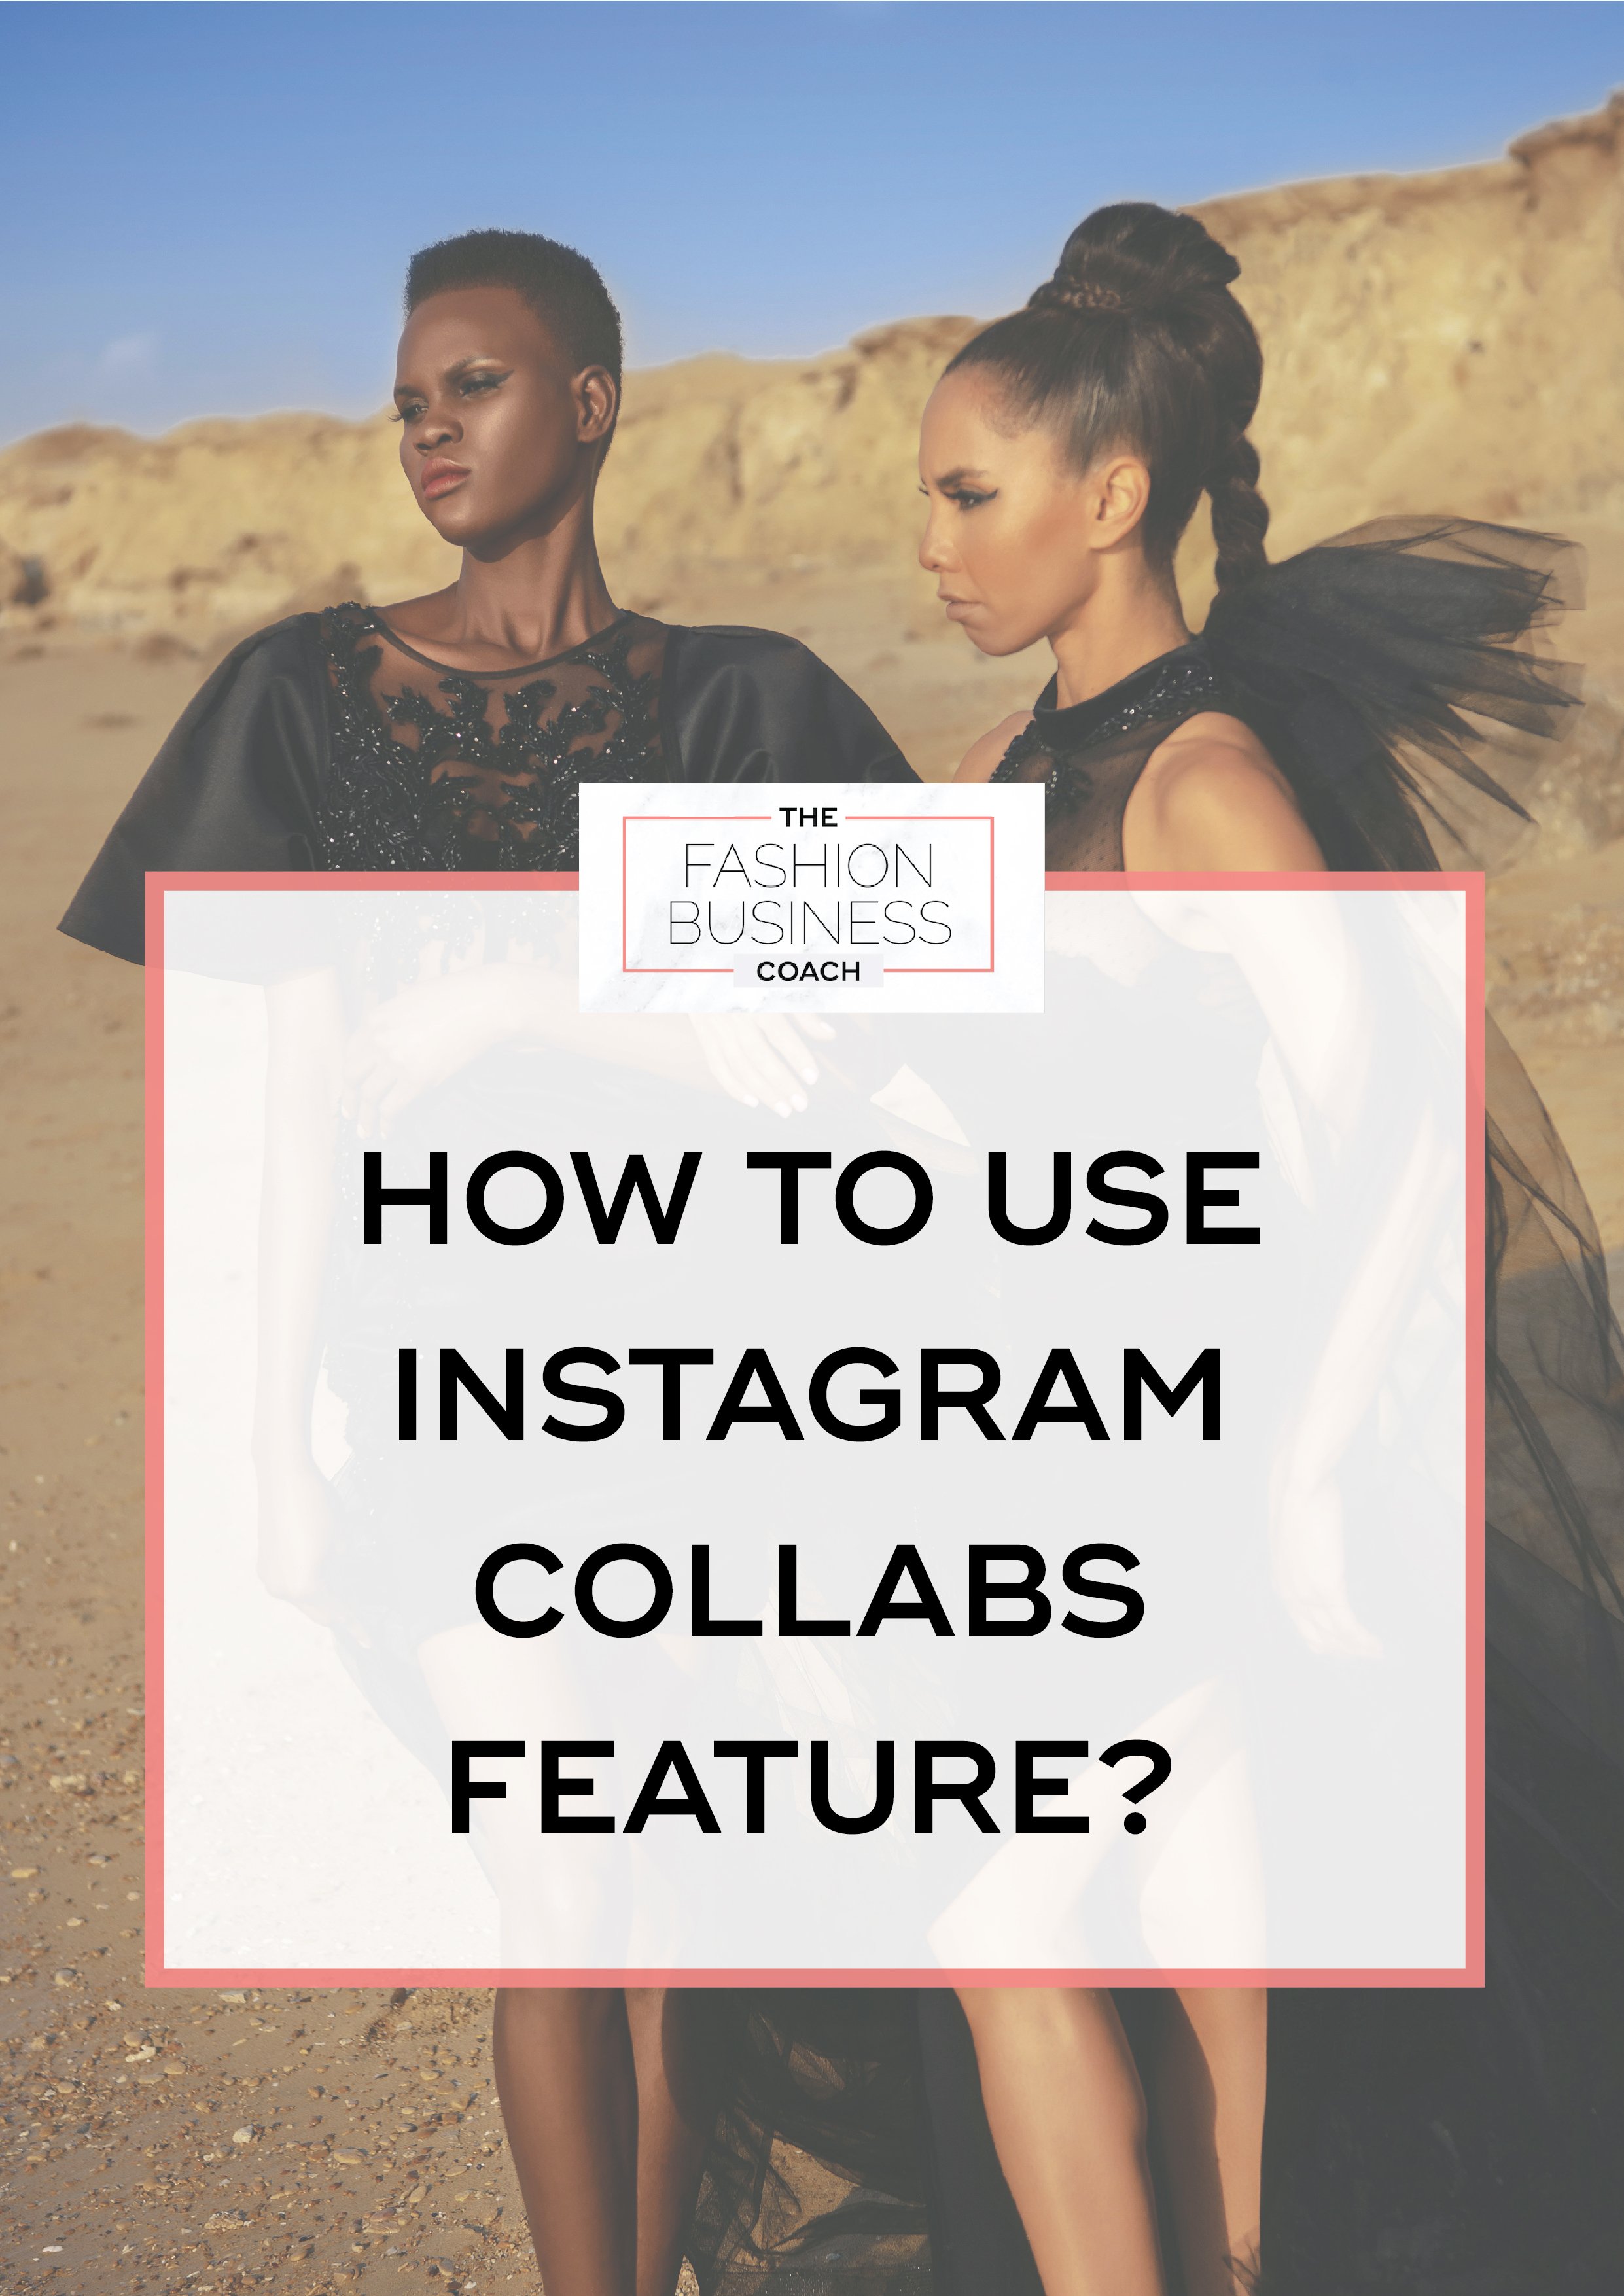 How to Use Instagram Collabs Feature 2.jpg